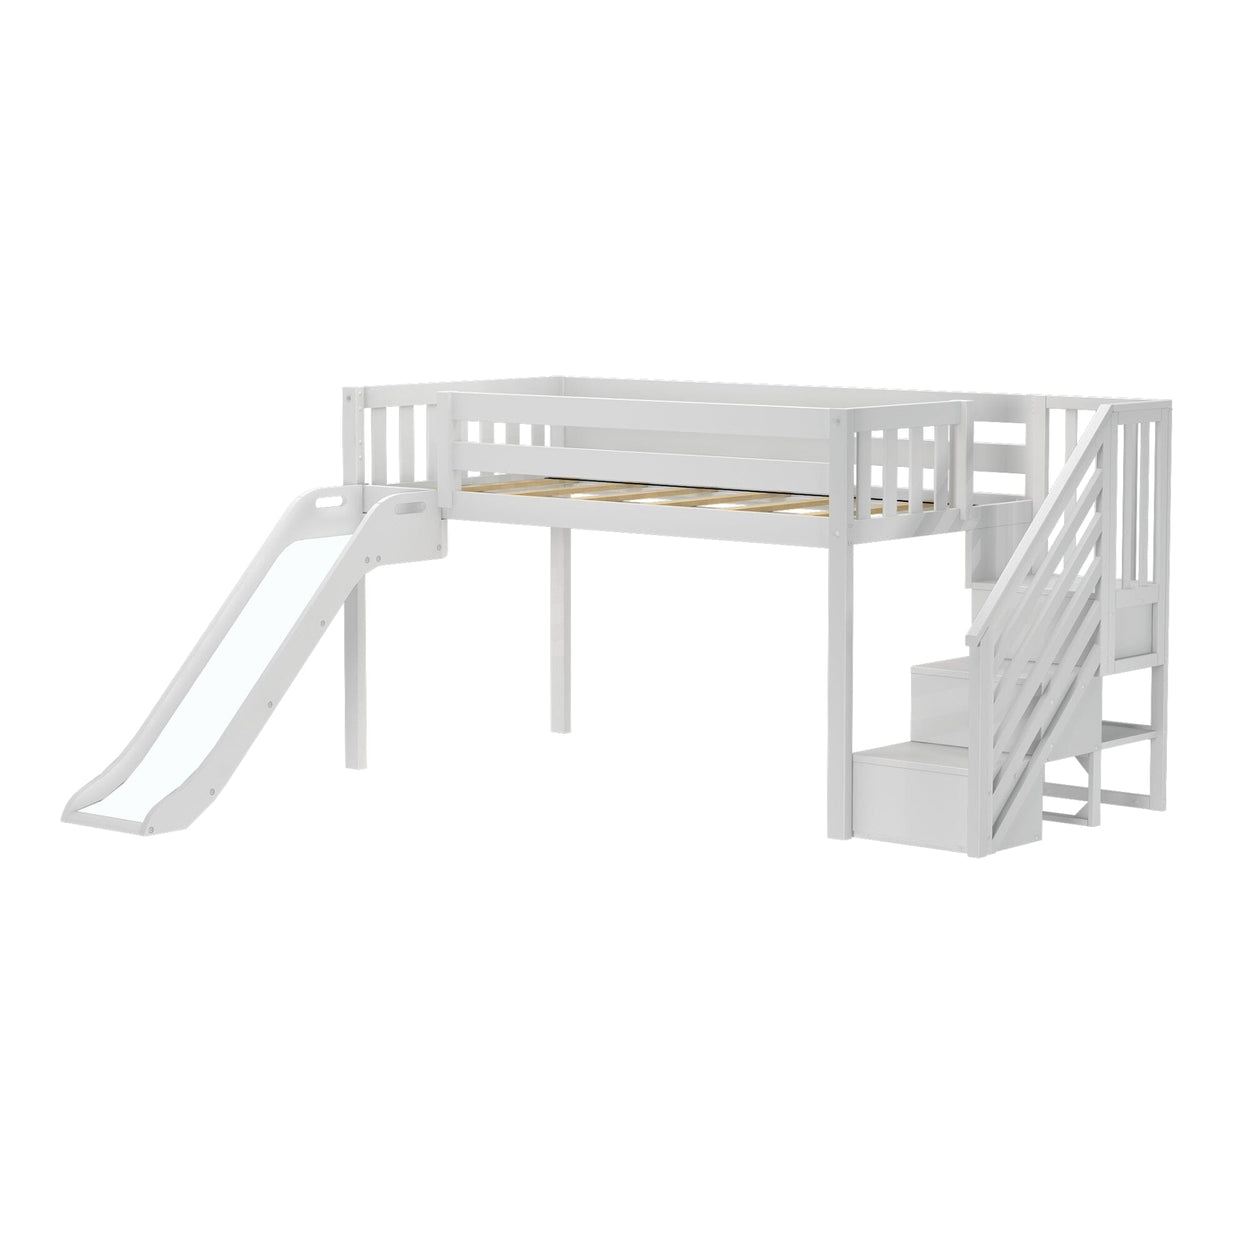 180425002067 : Loft Beds Low Loft with Stairs, Easy Slide and Orange Camper Van Curtain, White